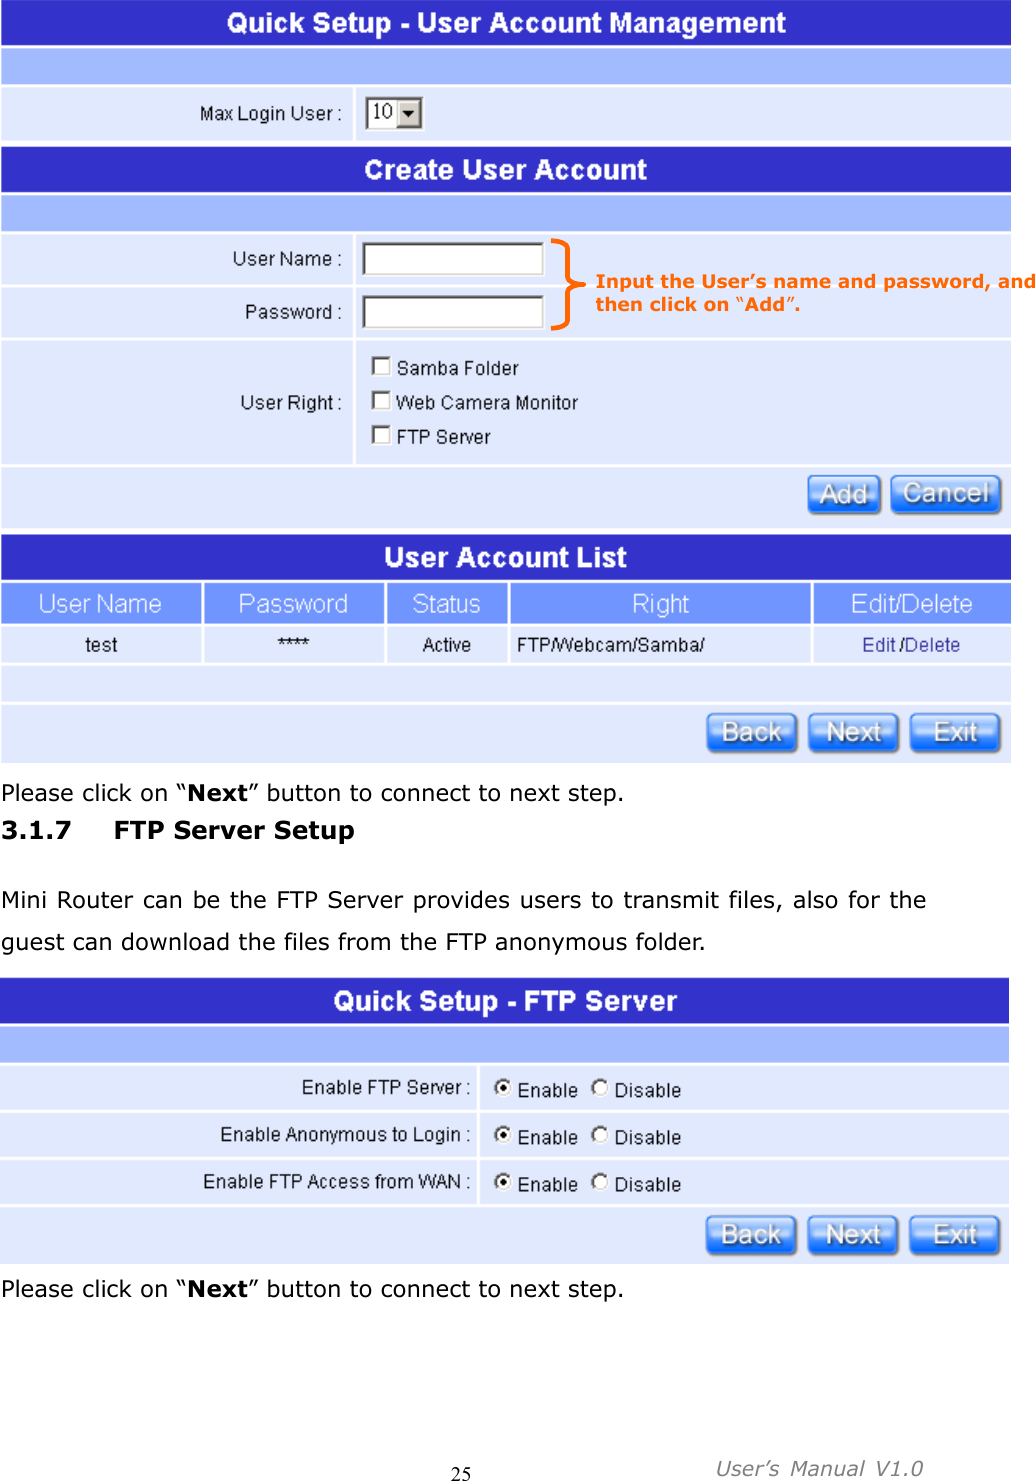                                     25           User’s  Manual  V1.0   Please click on “Next” button to connect to next step. 3.1.7 FTP Server Setup  Mini Router can be the FTP Server provides users to transmit files, also for the guest can download the files from the FTP anonymous folder.  Please click on “Next” button to connect to next step. Input the User’s name and password, and then click on “Add”. 